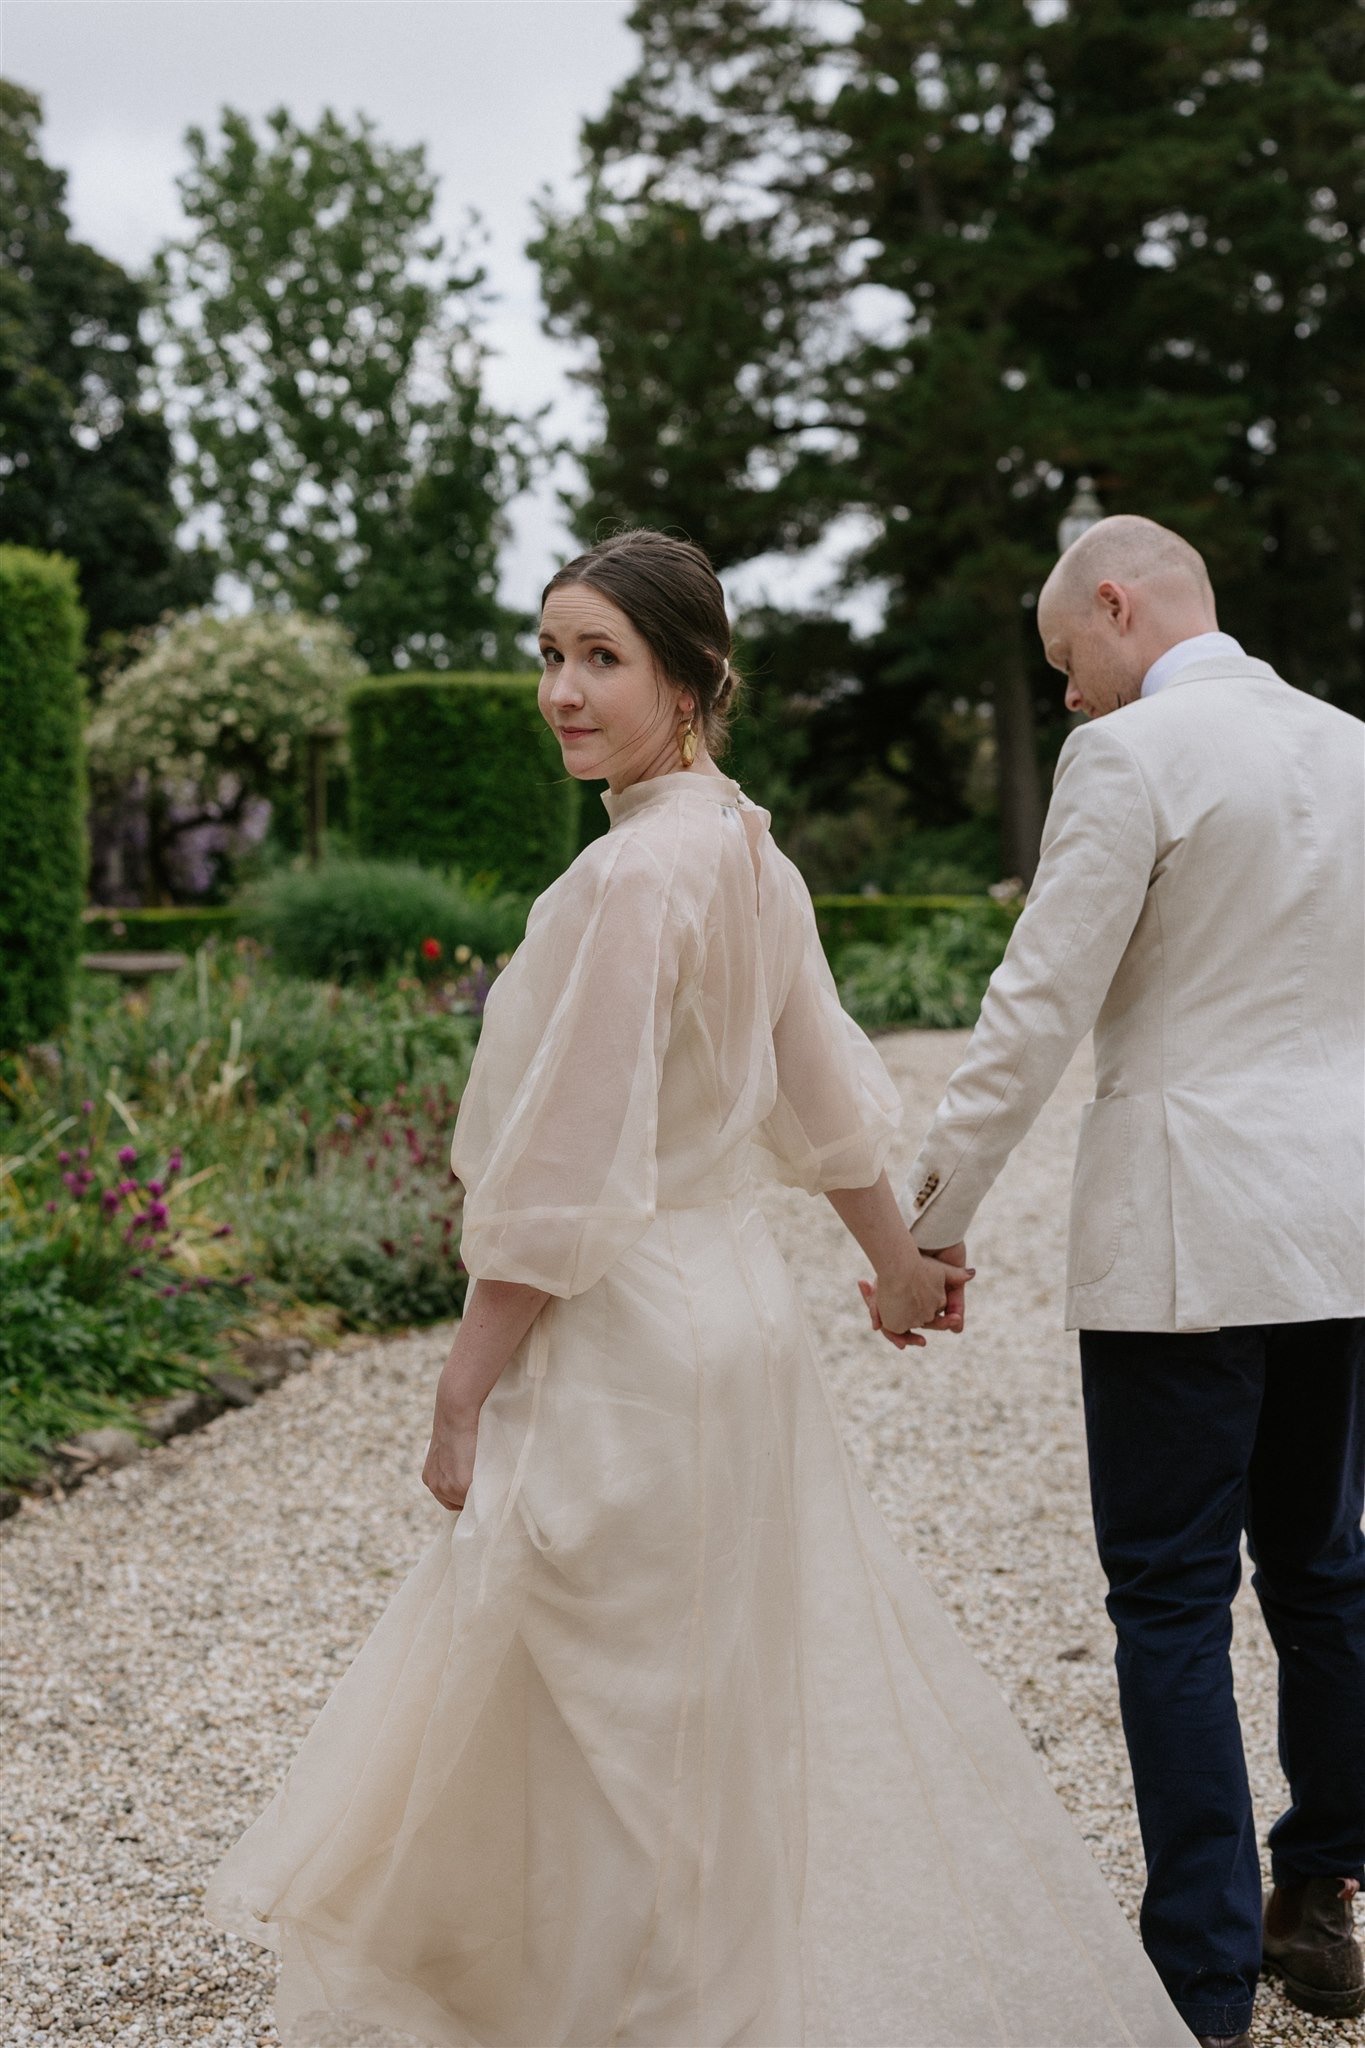 A bride wearing an ethically made wedding gown looks back at the camera while walking through an elegant garden